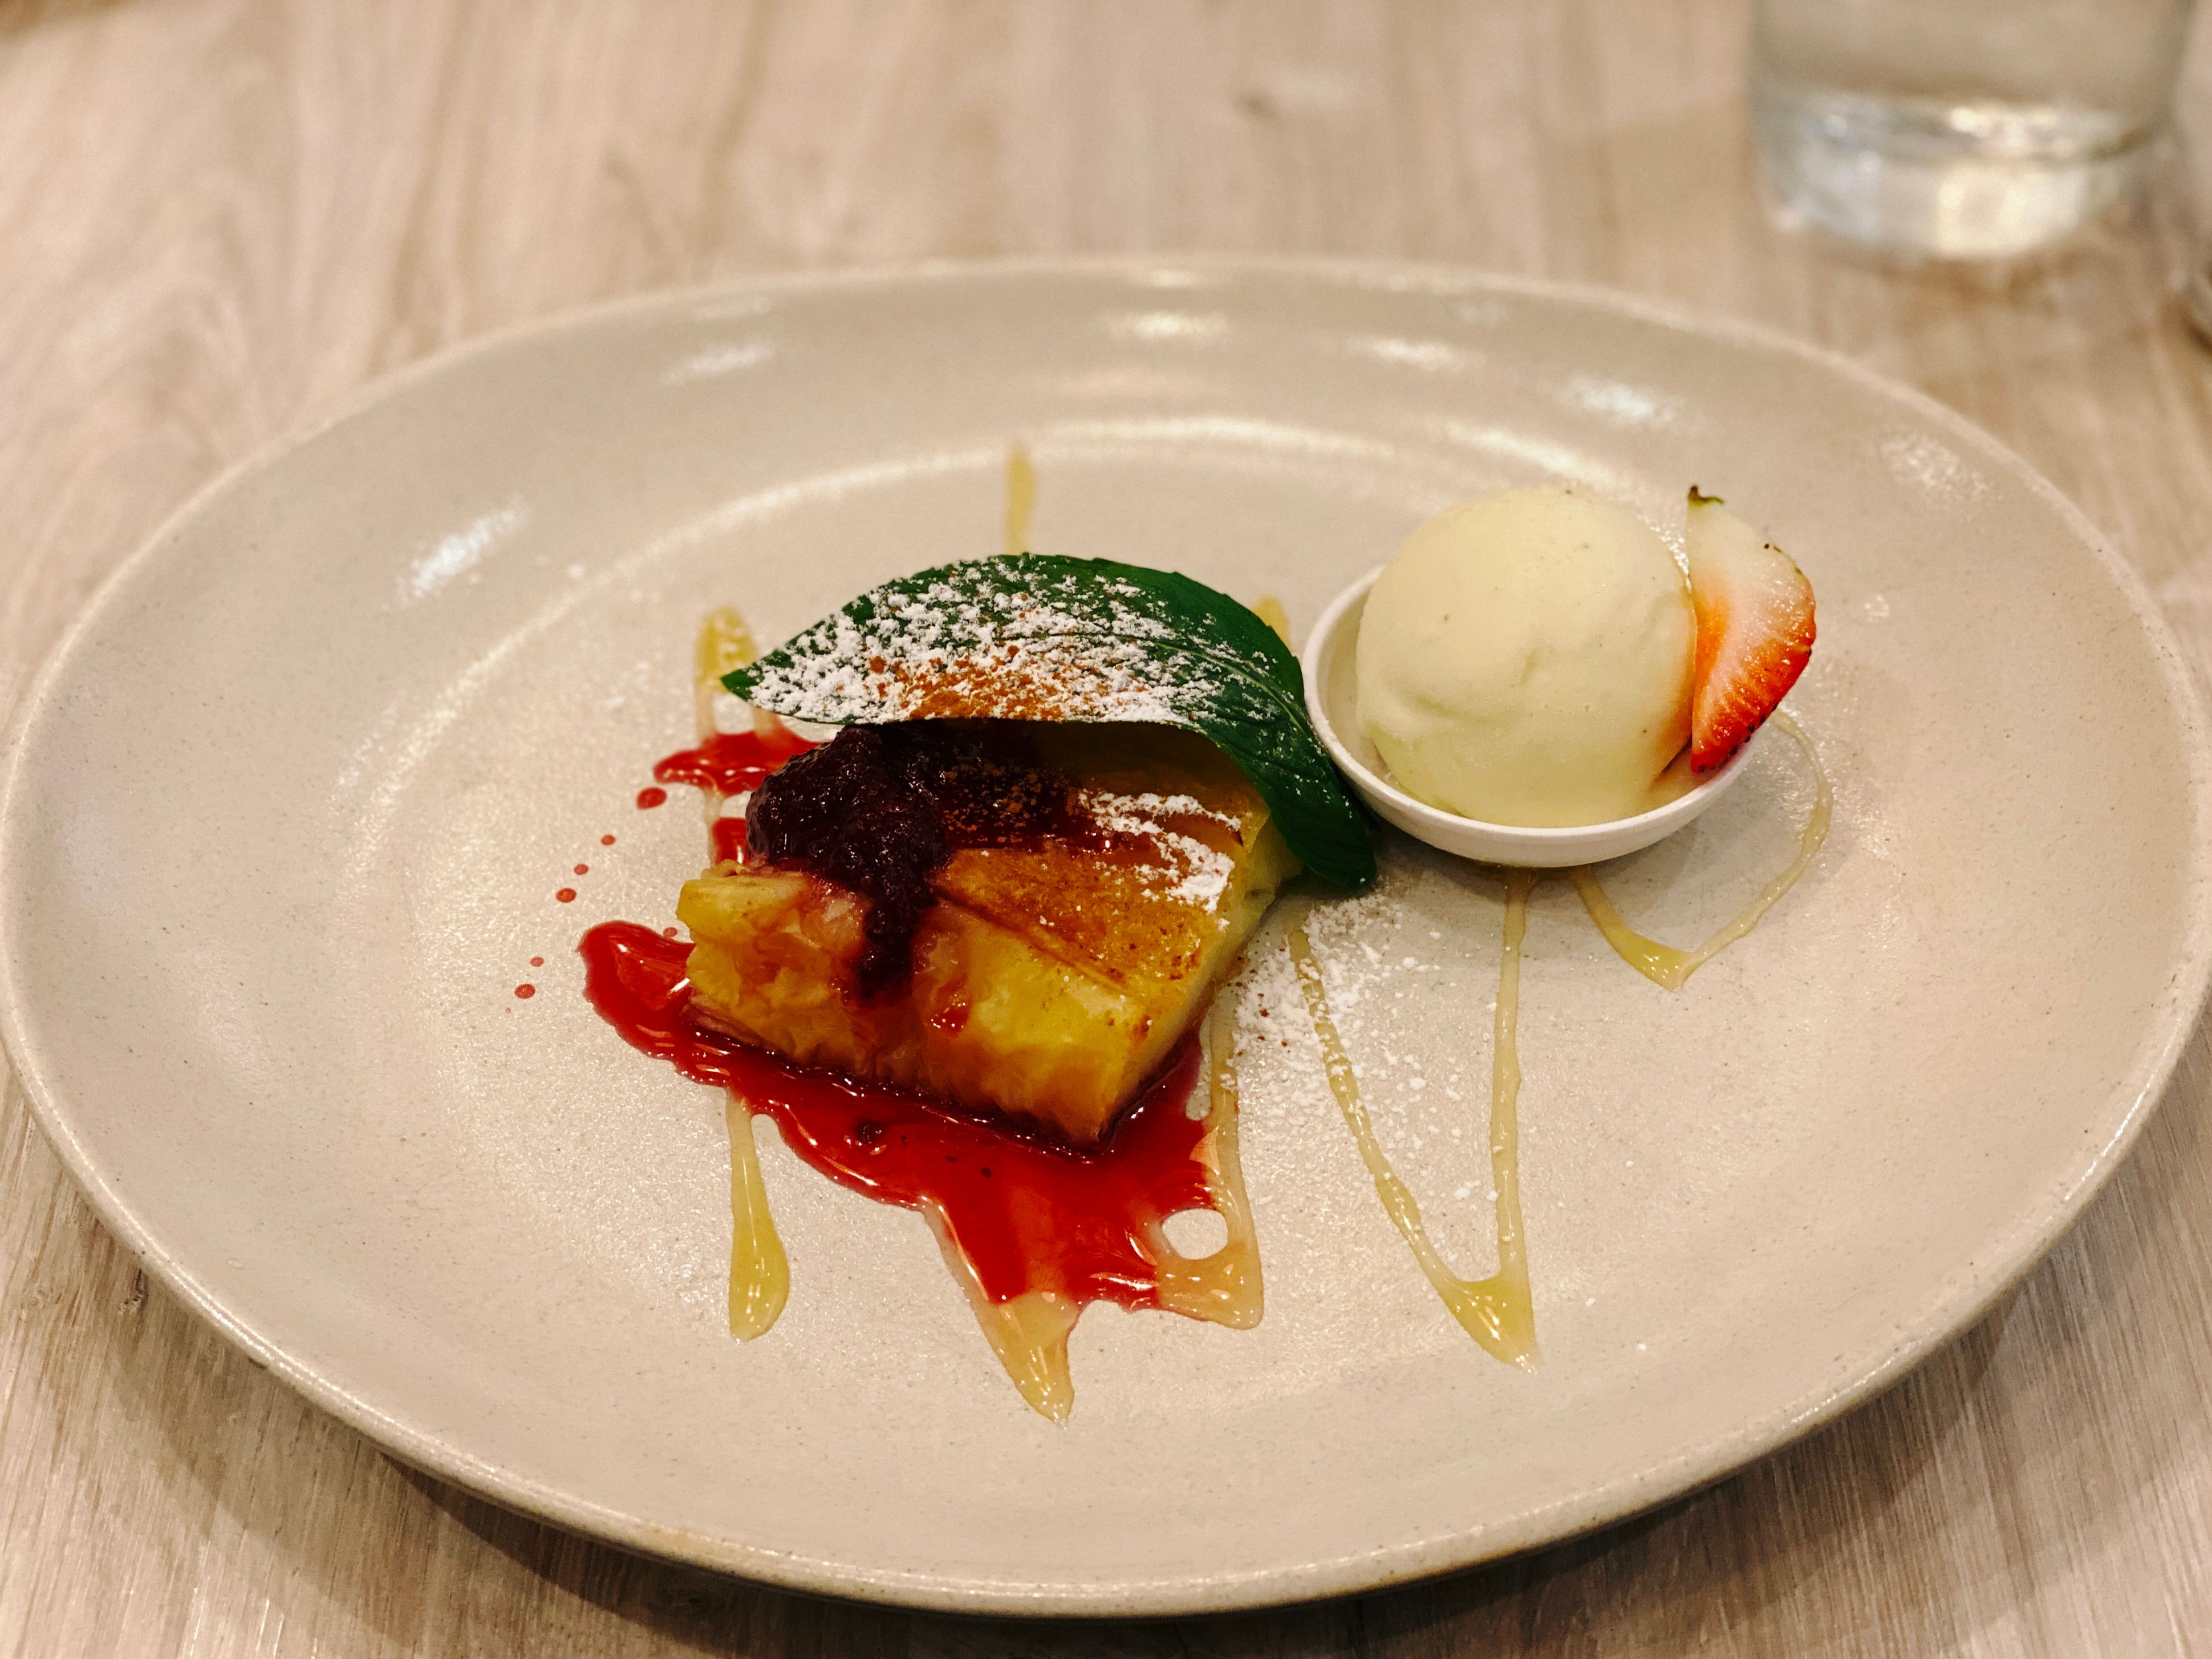 A photo of galaktoboureko, which is a Greek dessert made of filo pastry and filled with semolina custard. There's a berry compote on it and some vanilla bean ice cream next to it.